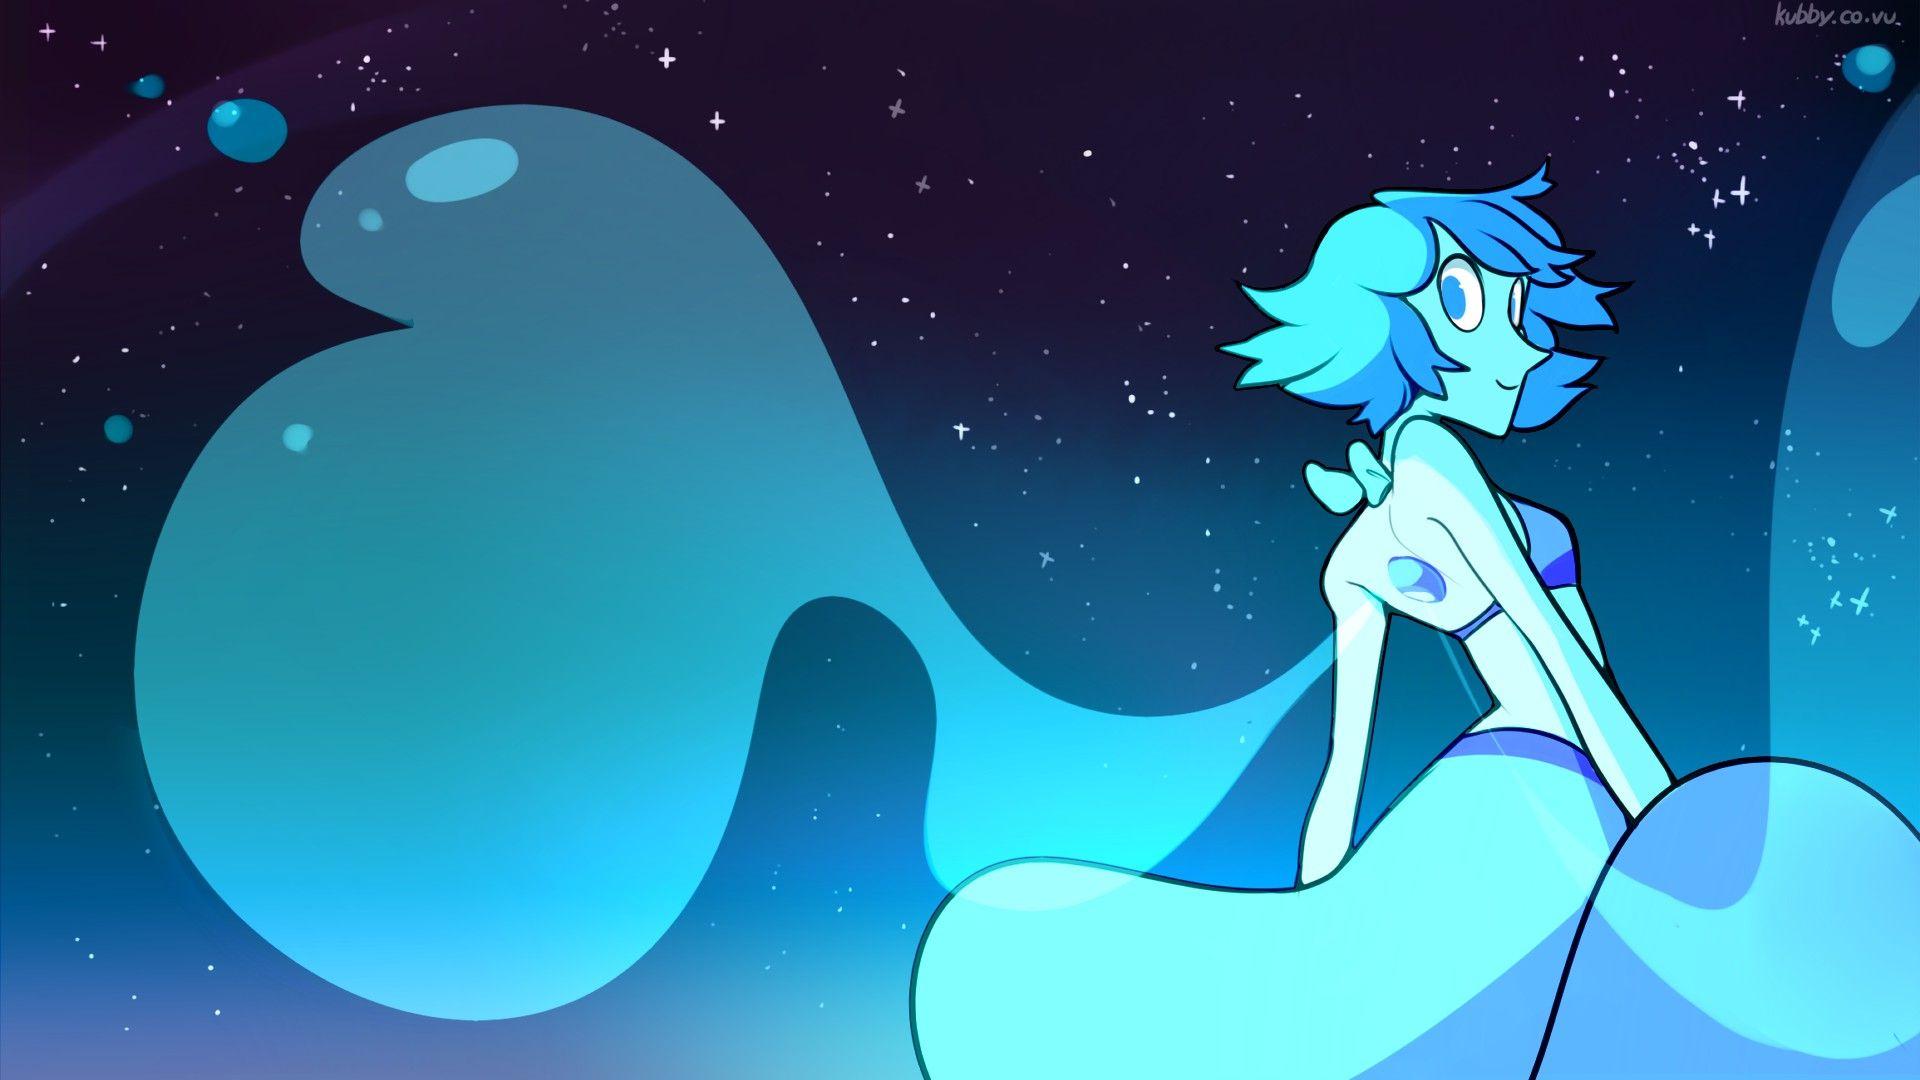 Steven Universe background ArtDownload free awesome full HD